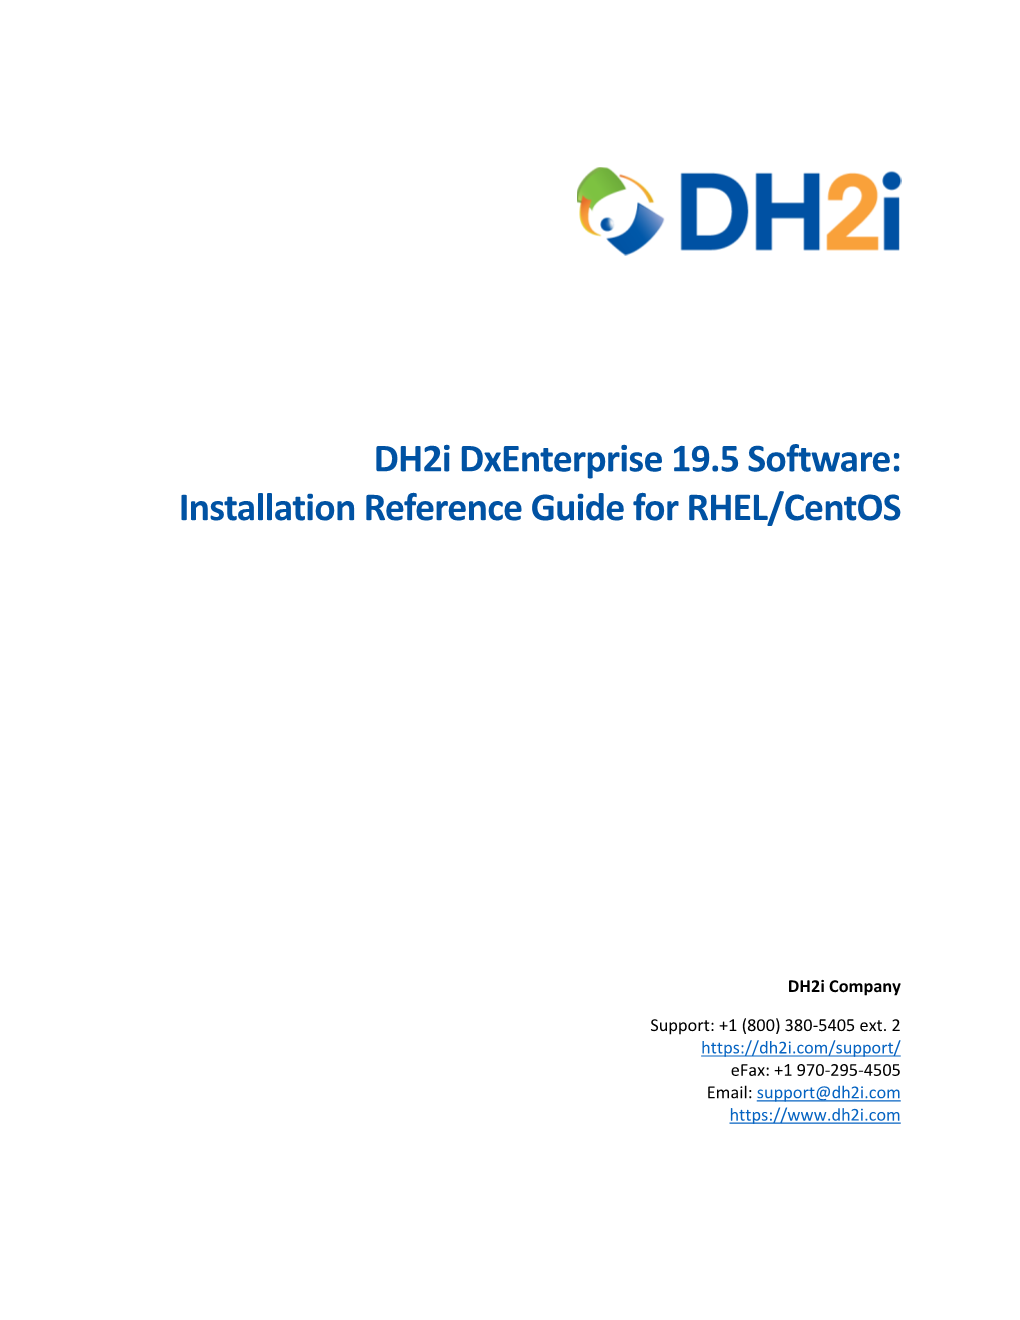 Dh2i Dxenterprise 19.5 Software: Installation Reference Guide for RHEL/Centos